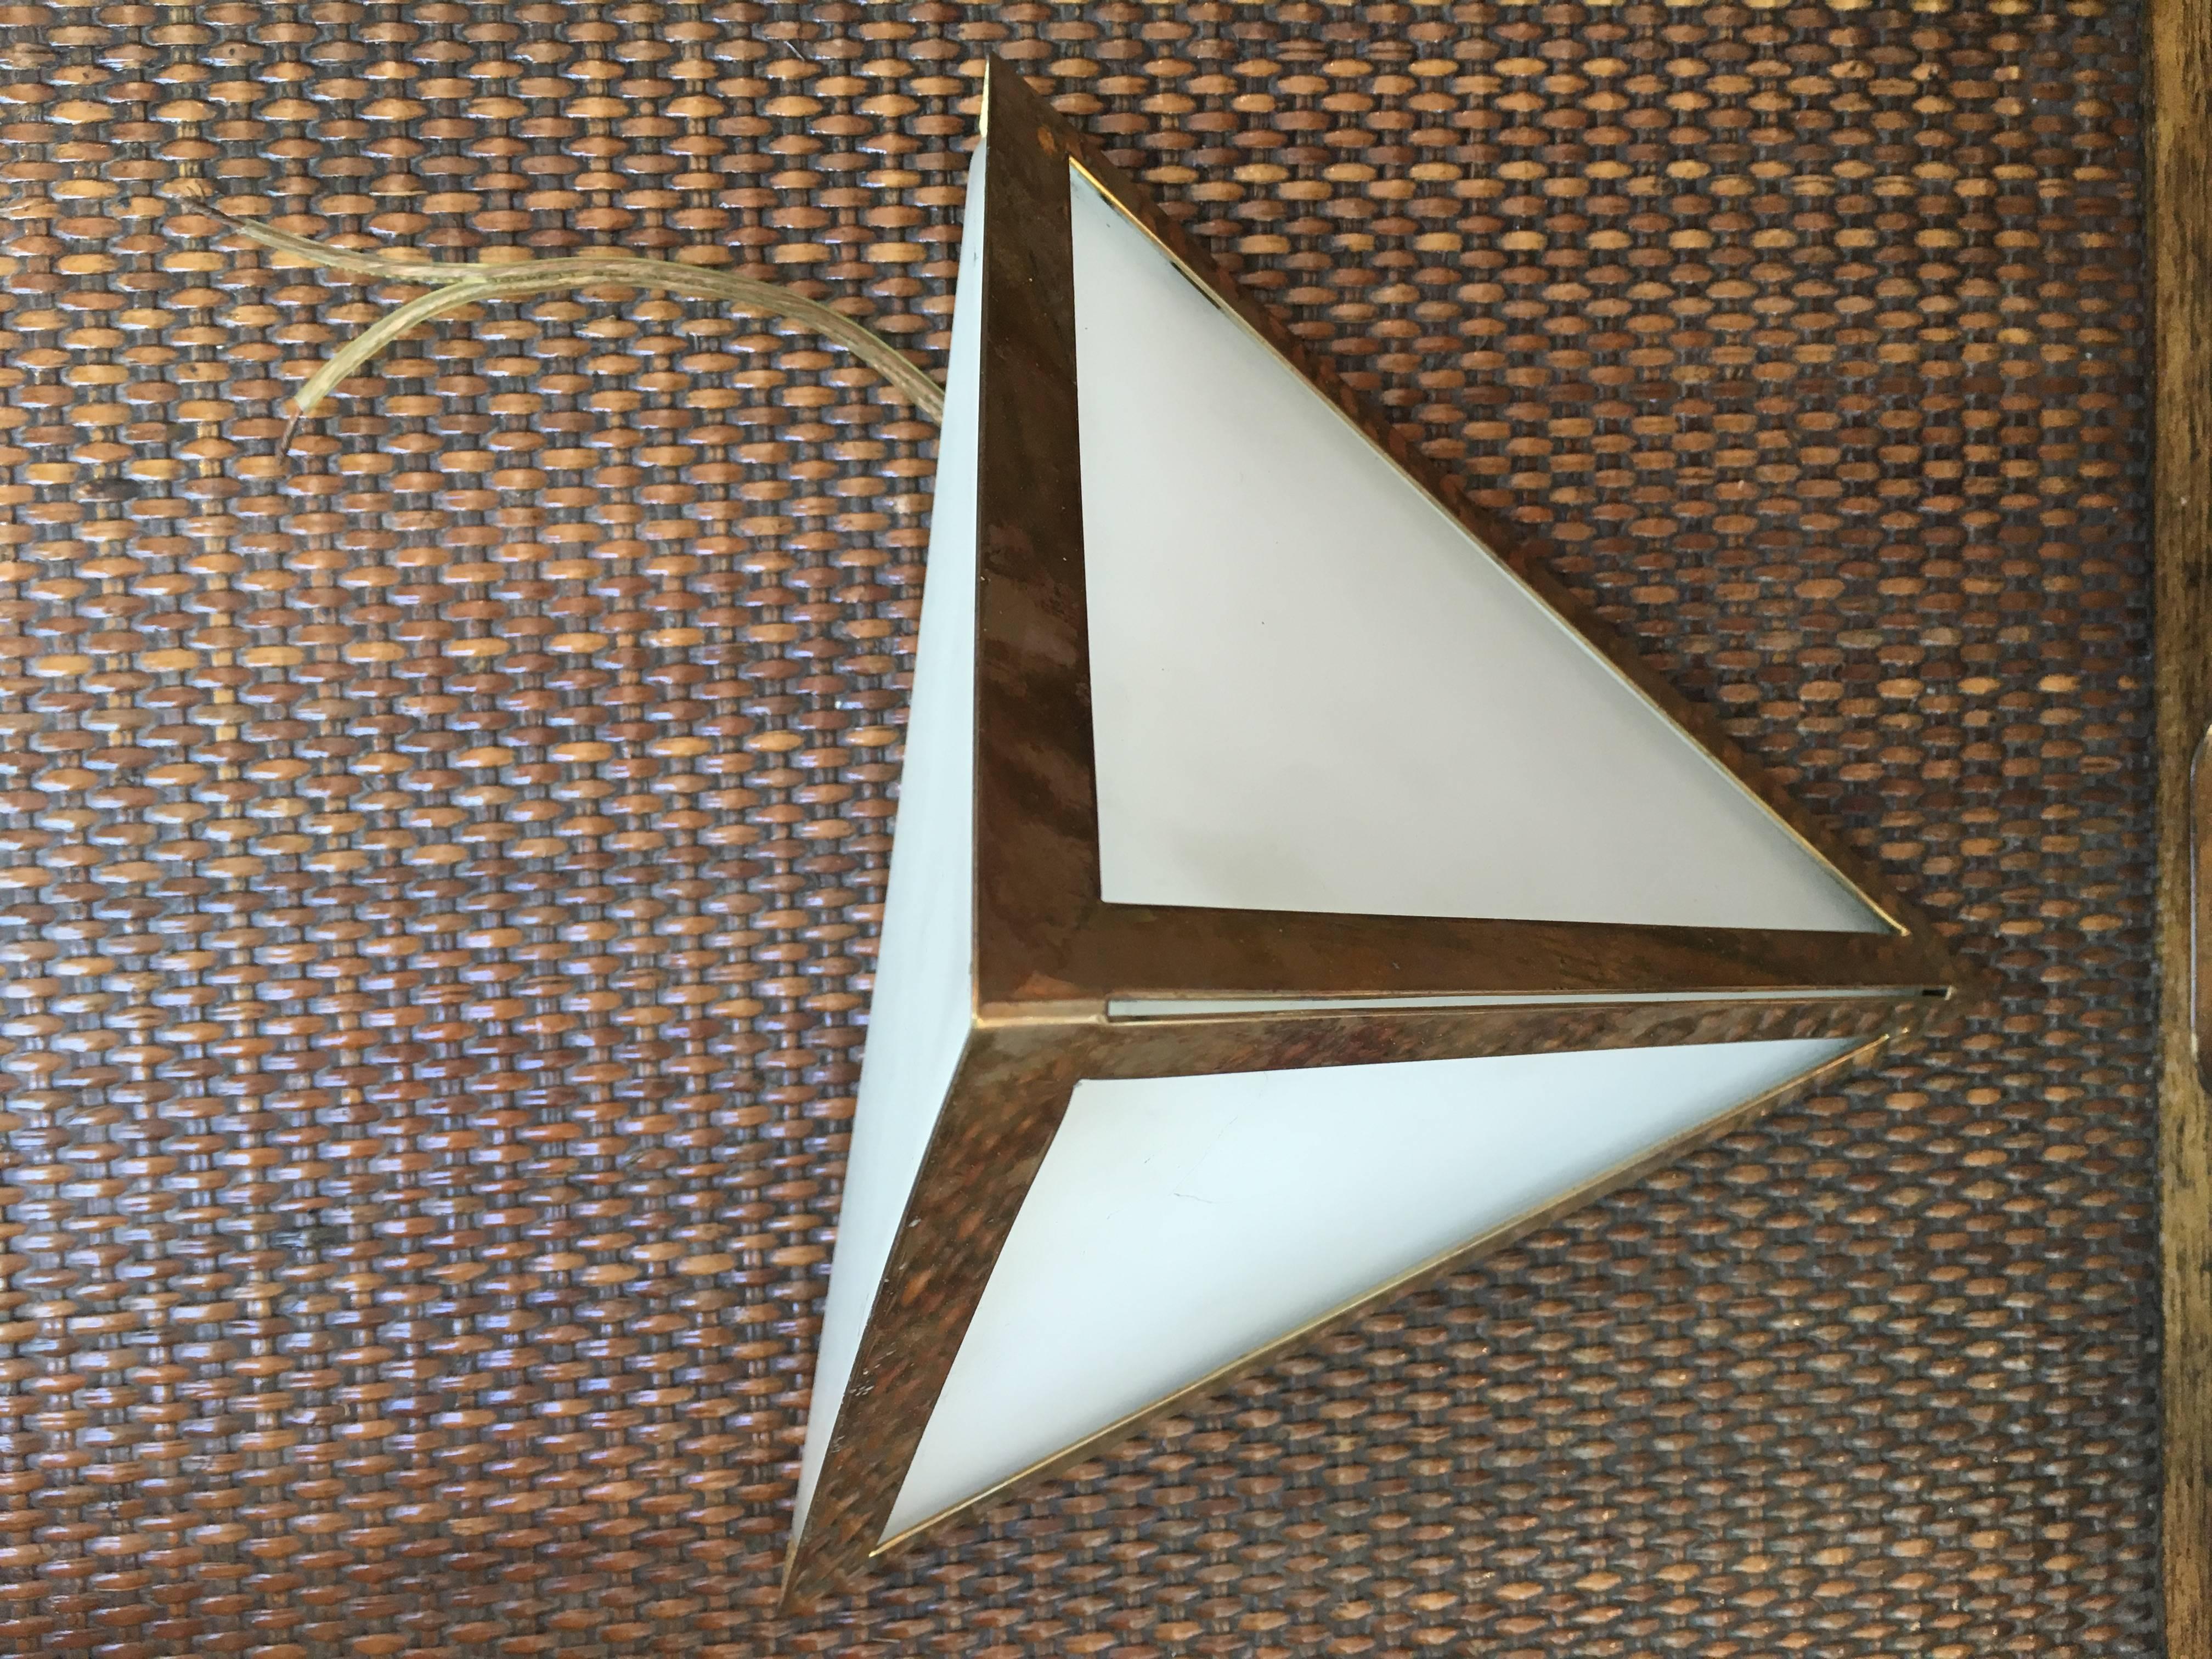 Industrial Pair of Triangular Wall Sconces from a 1970s Cruise Ship Stateroom